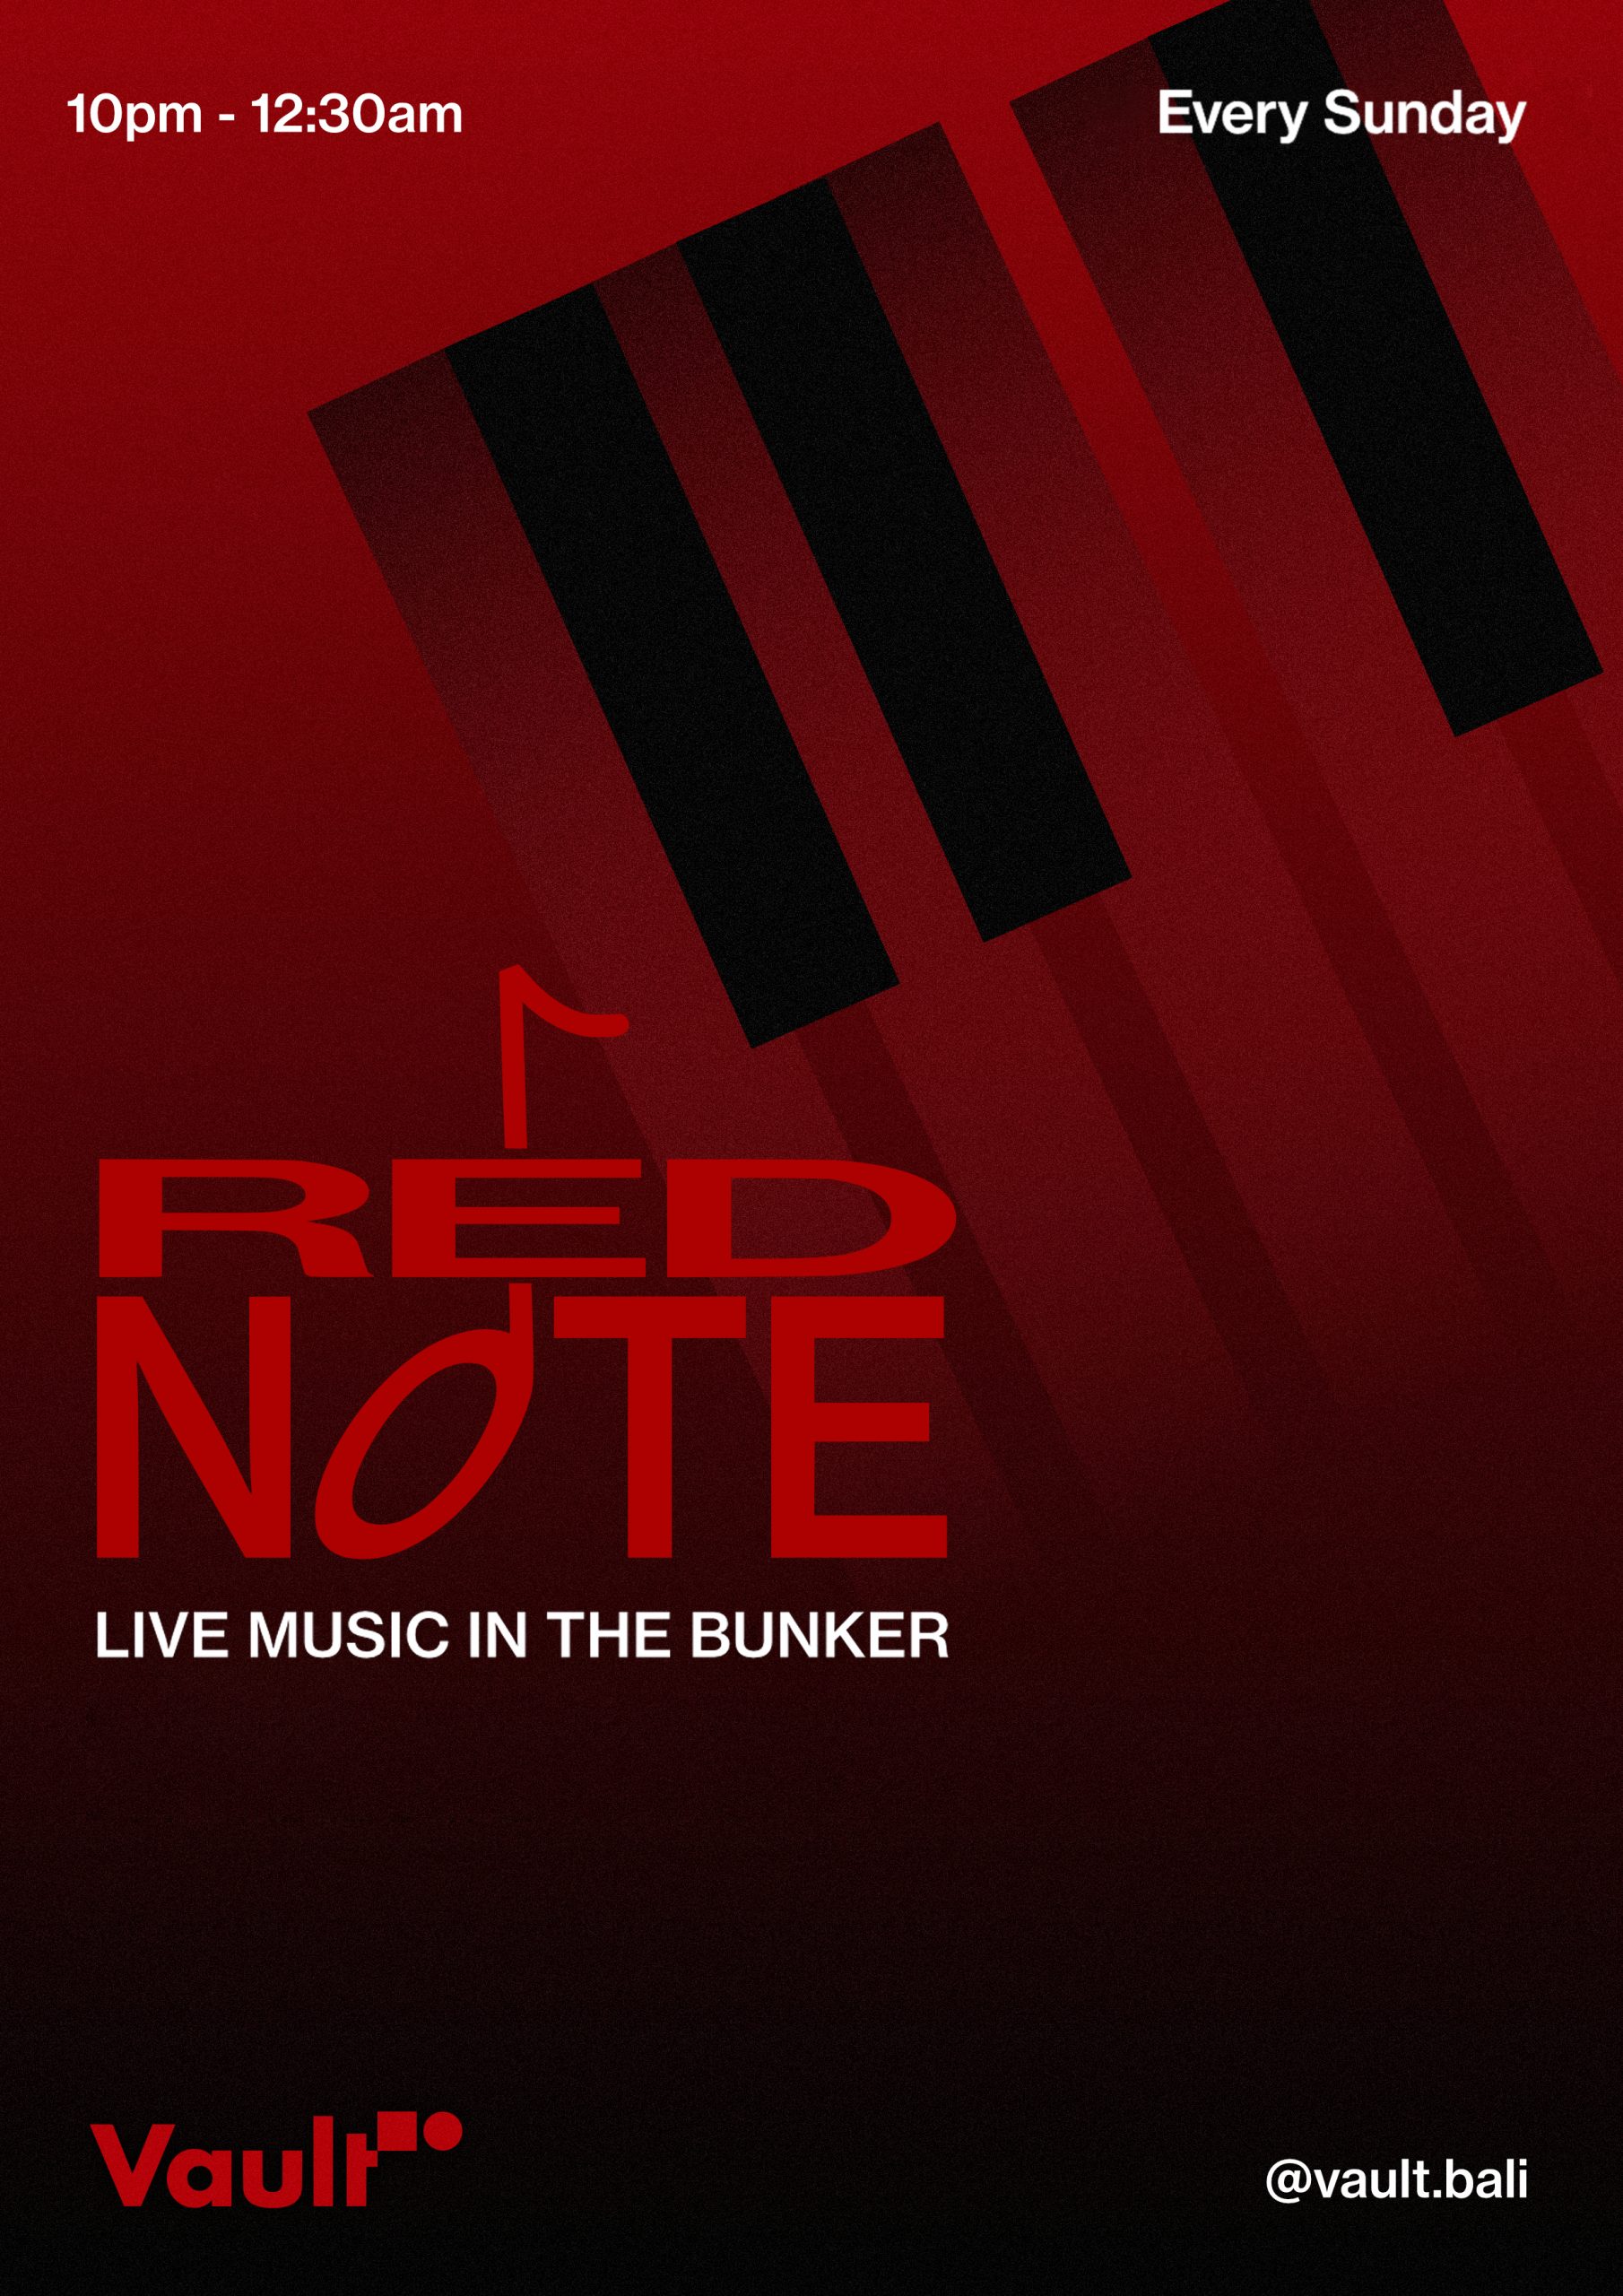 VAULT PRESENTS: RED NOTE thumbnail image